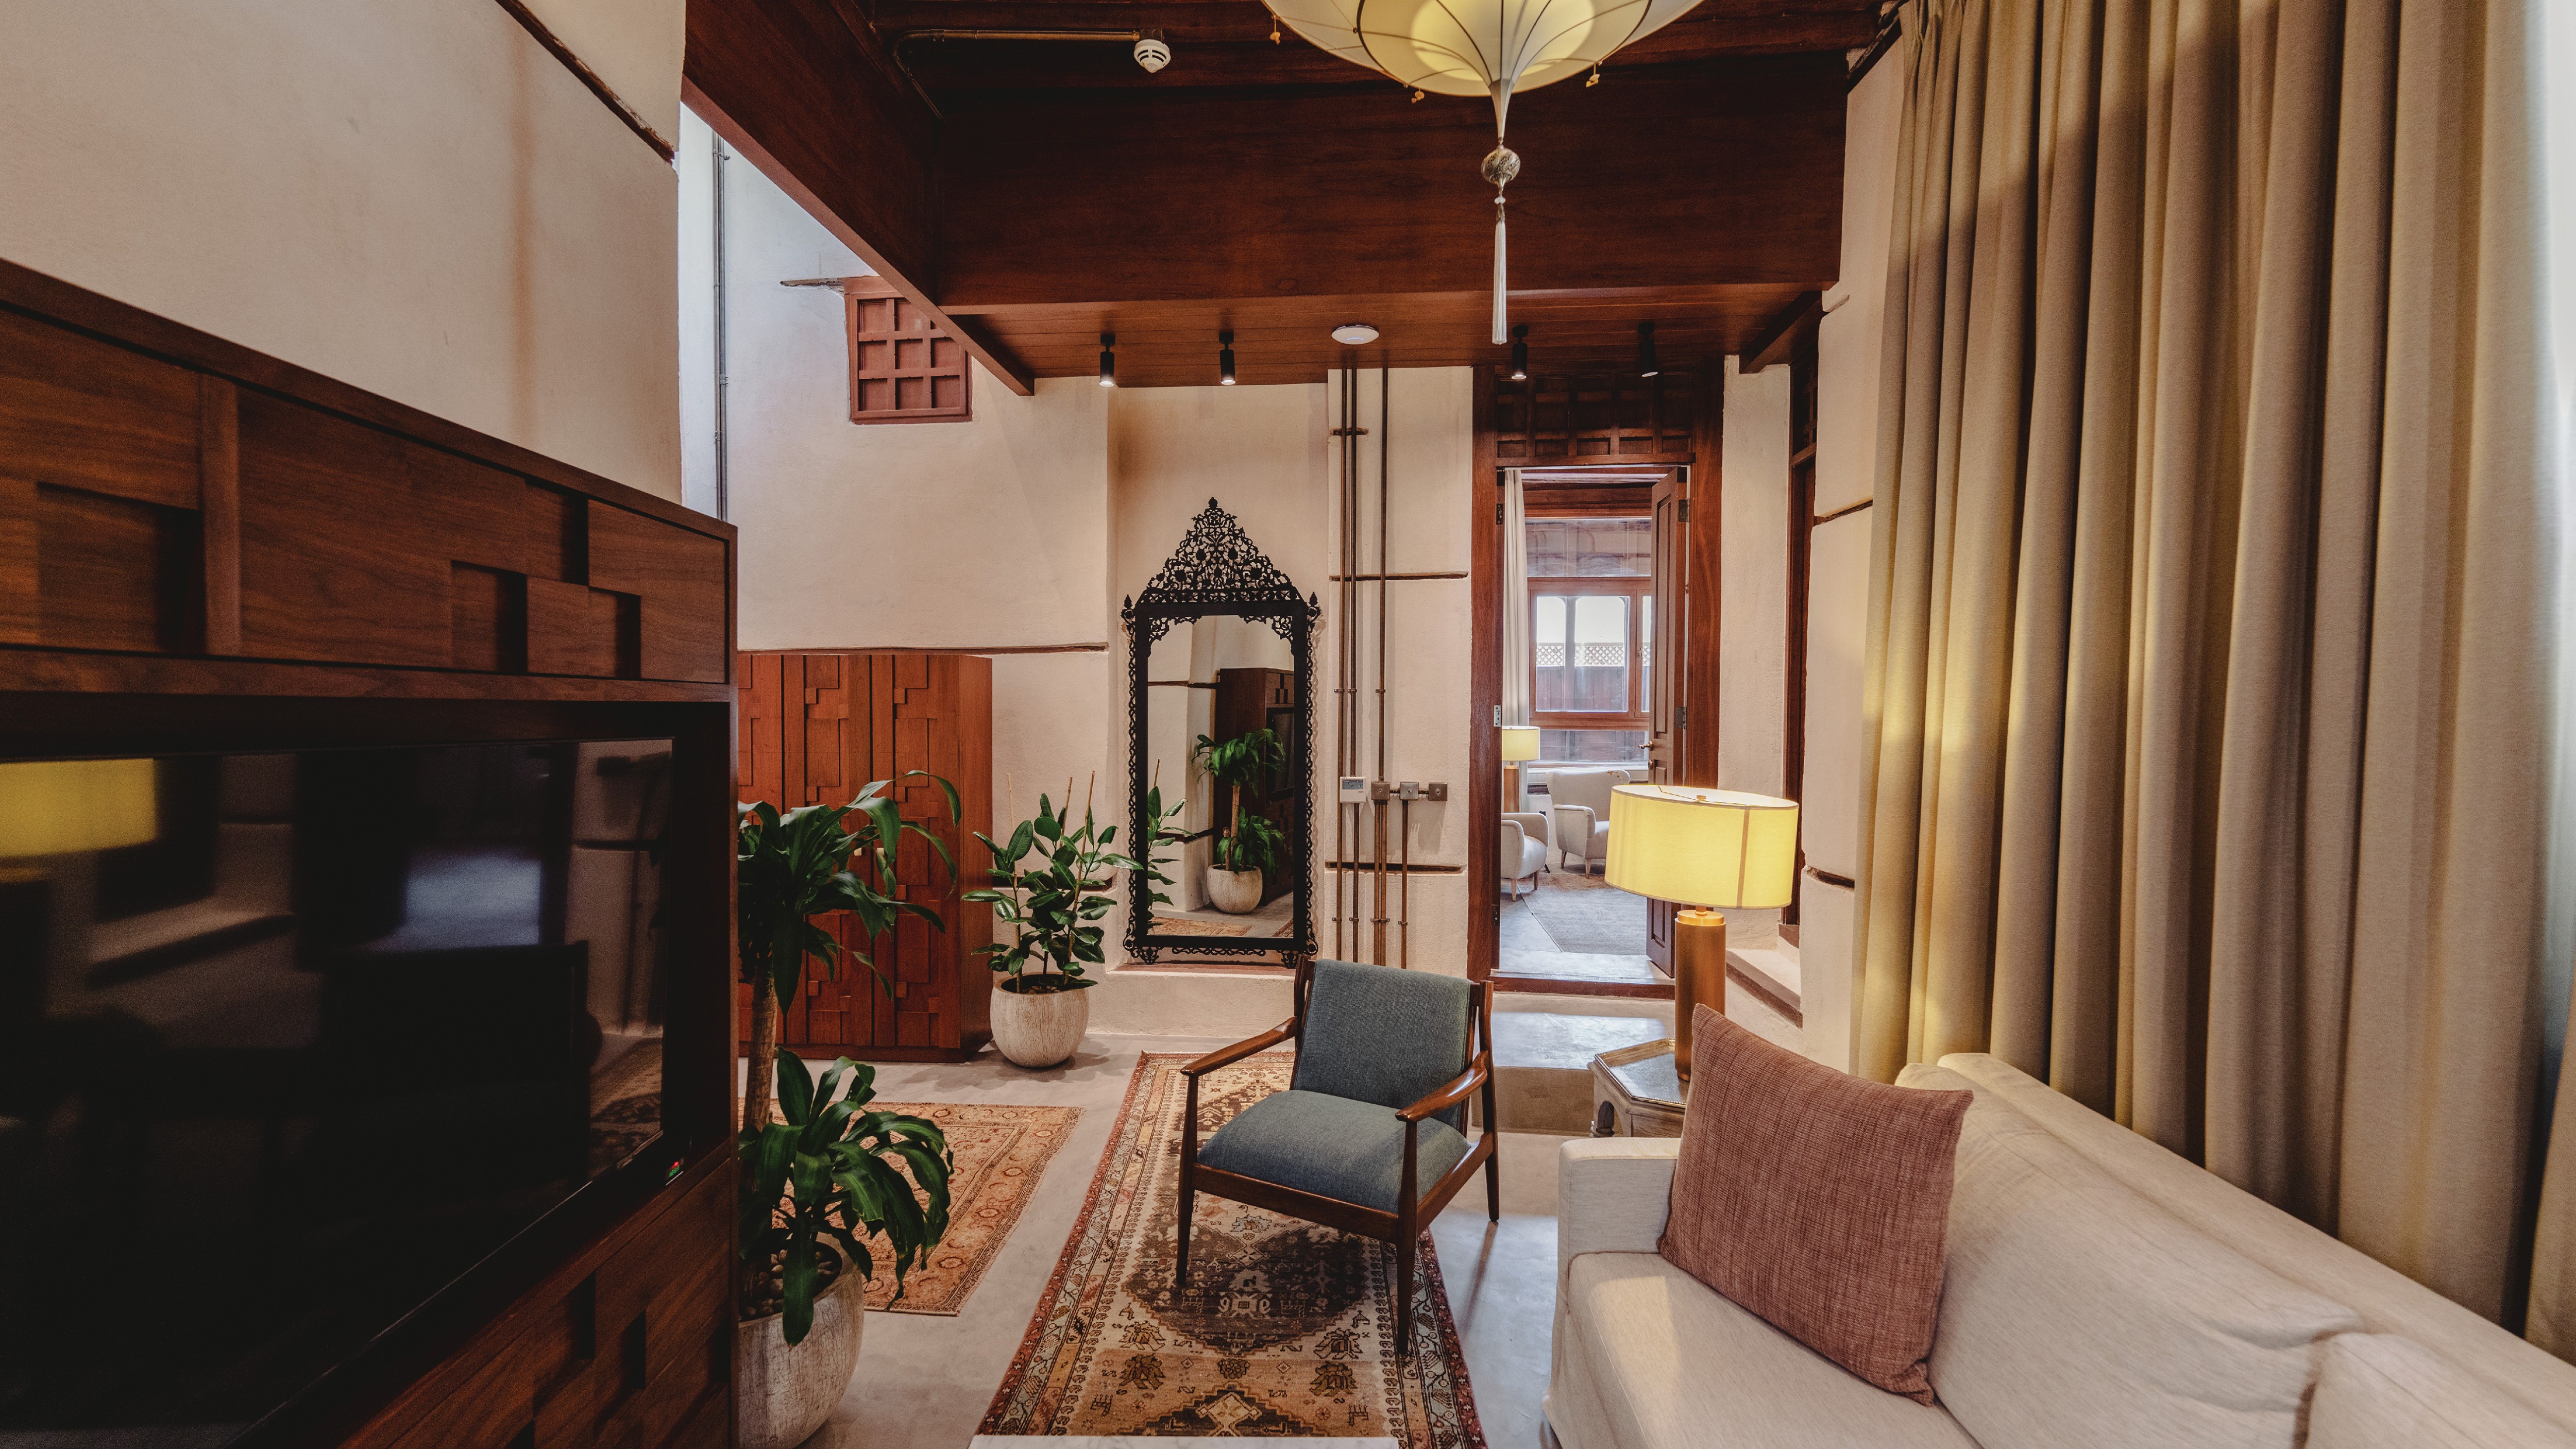 Beit Kedwan has multiple lounge areas decorated with both traditional and contemporary touches